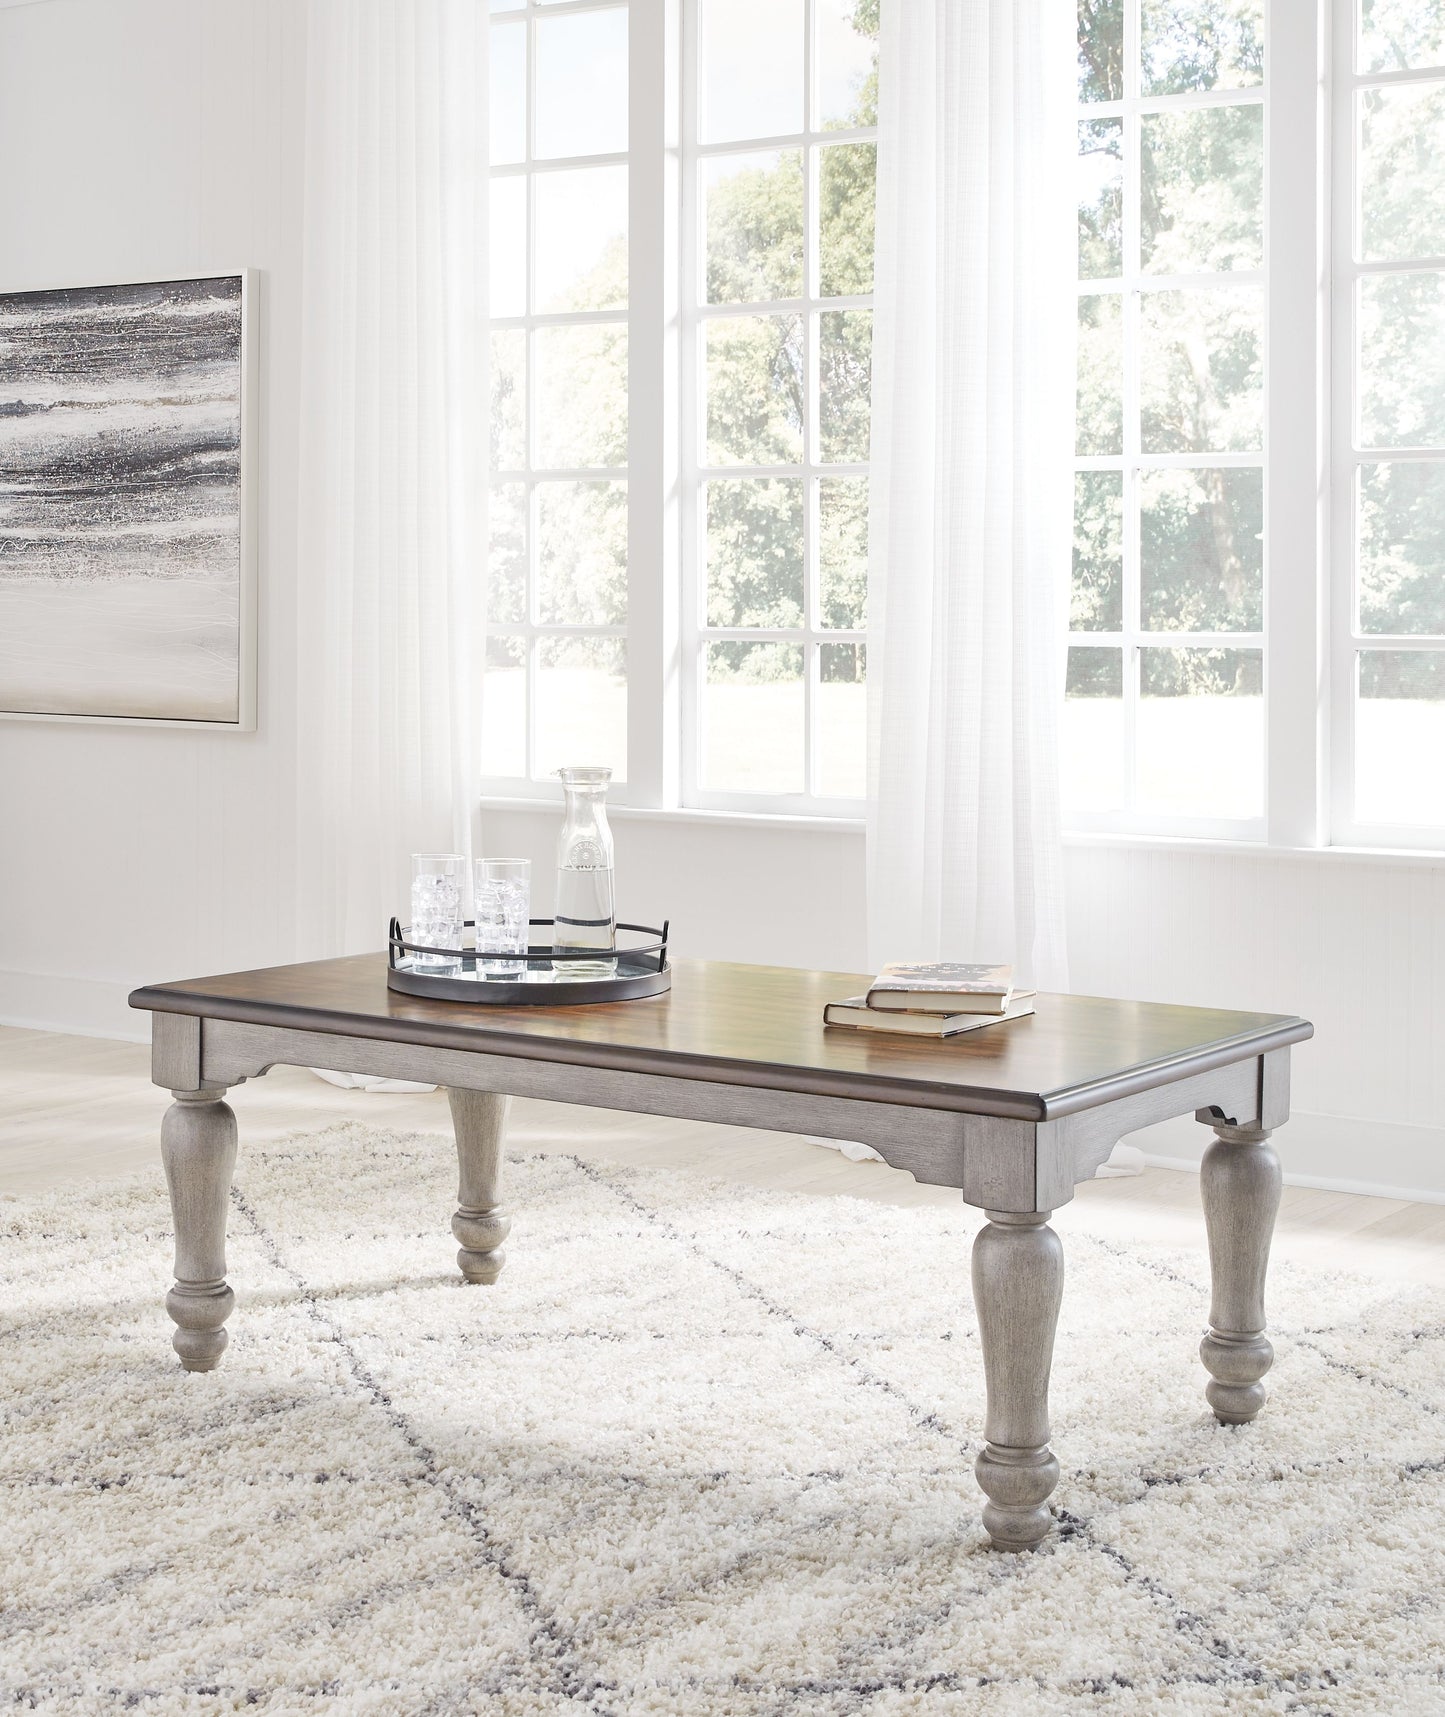 Lodenbay - Antique Gray / Brown - Rectangular Cocktail Table